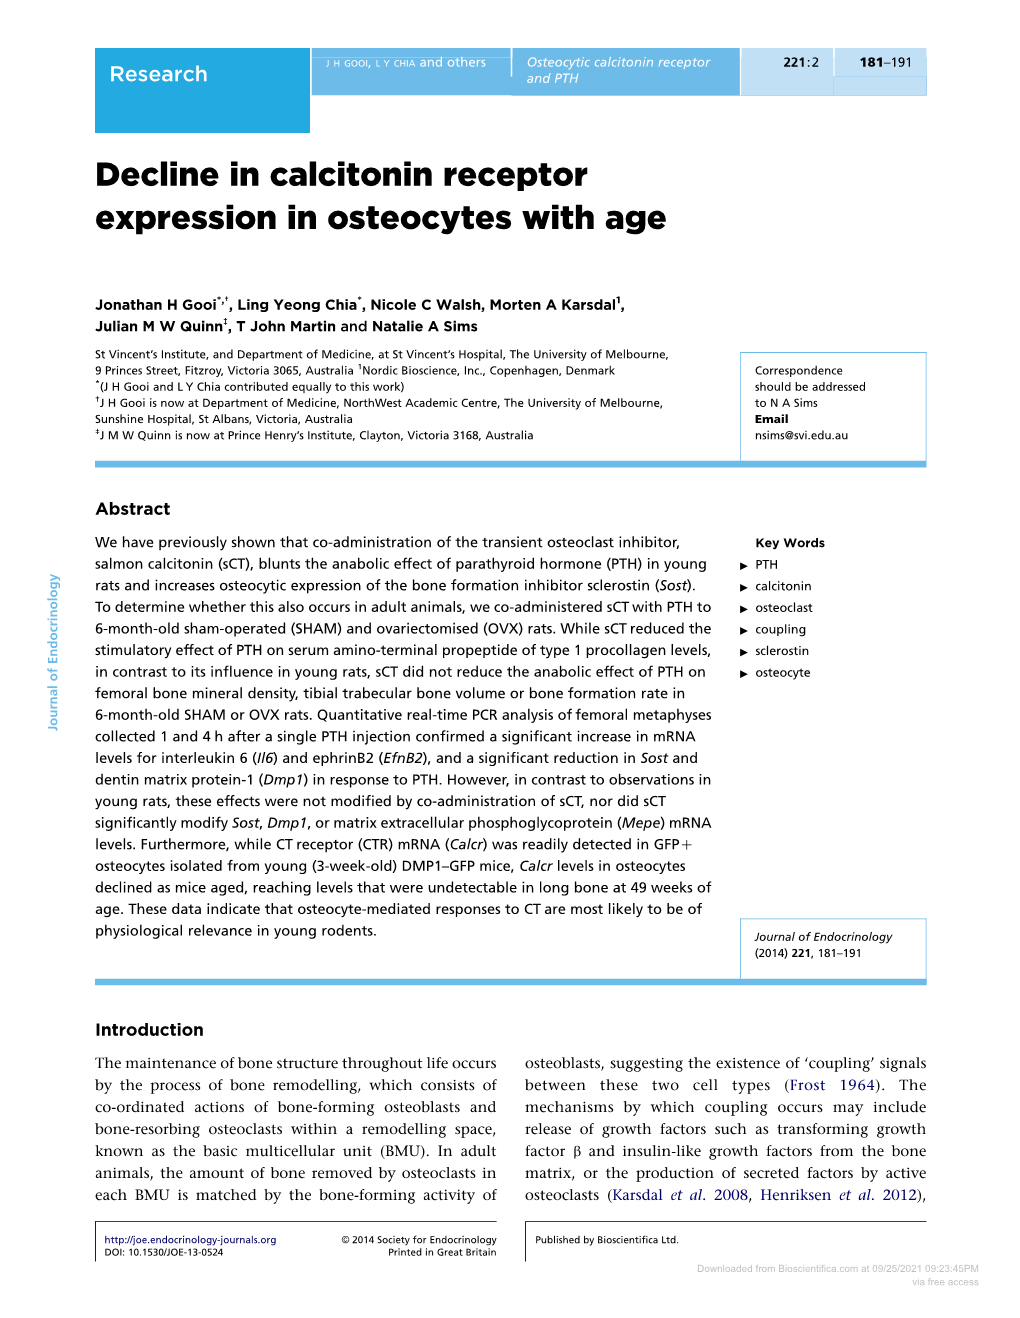 Decline in Calcitonin Receptor Expression in Osteocytes with Age